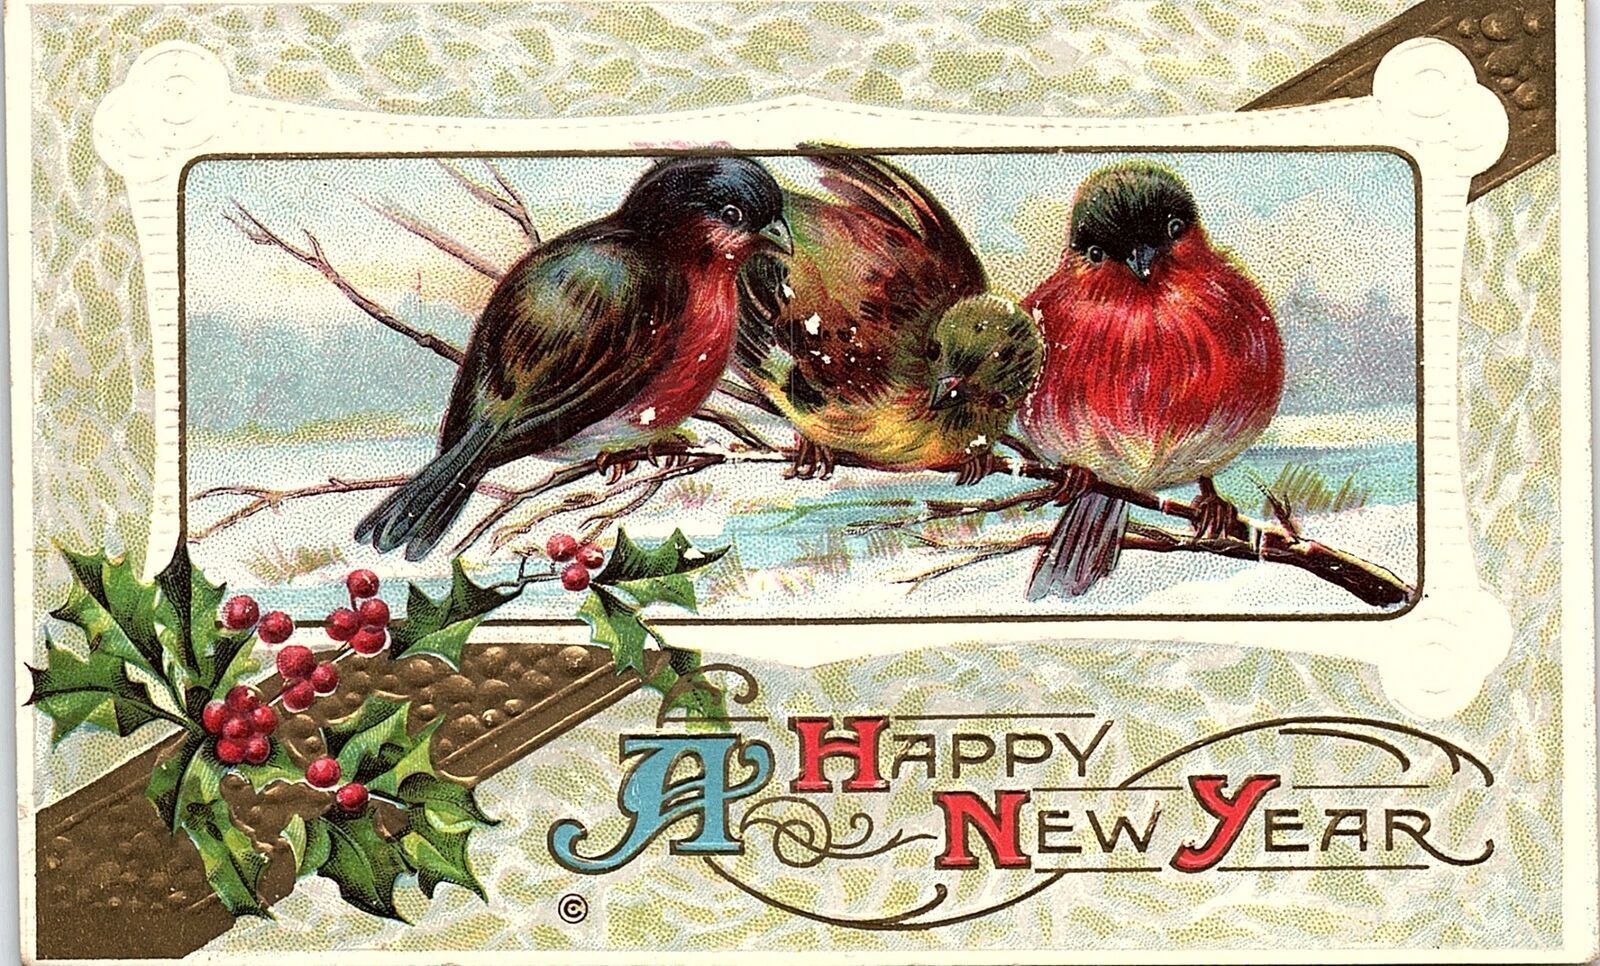 c1910 HAPPY NEW YEAR BIRDS ROBINS SNOW HOLLY GILDED EMBOSSED POSTCARD 42-317